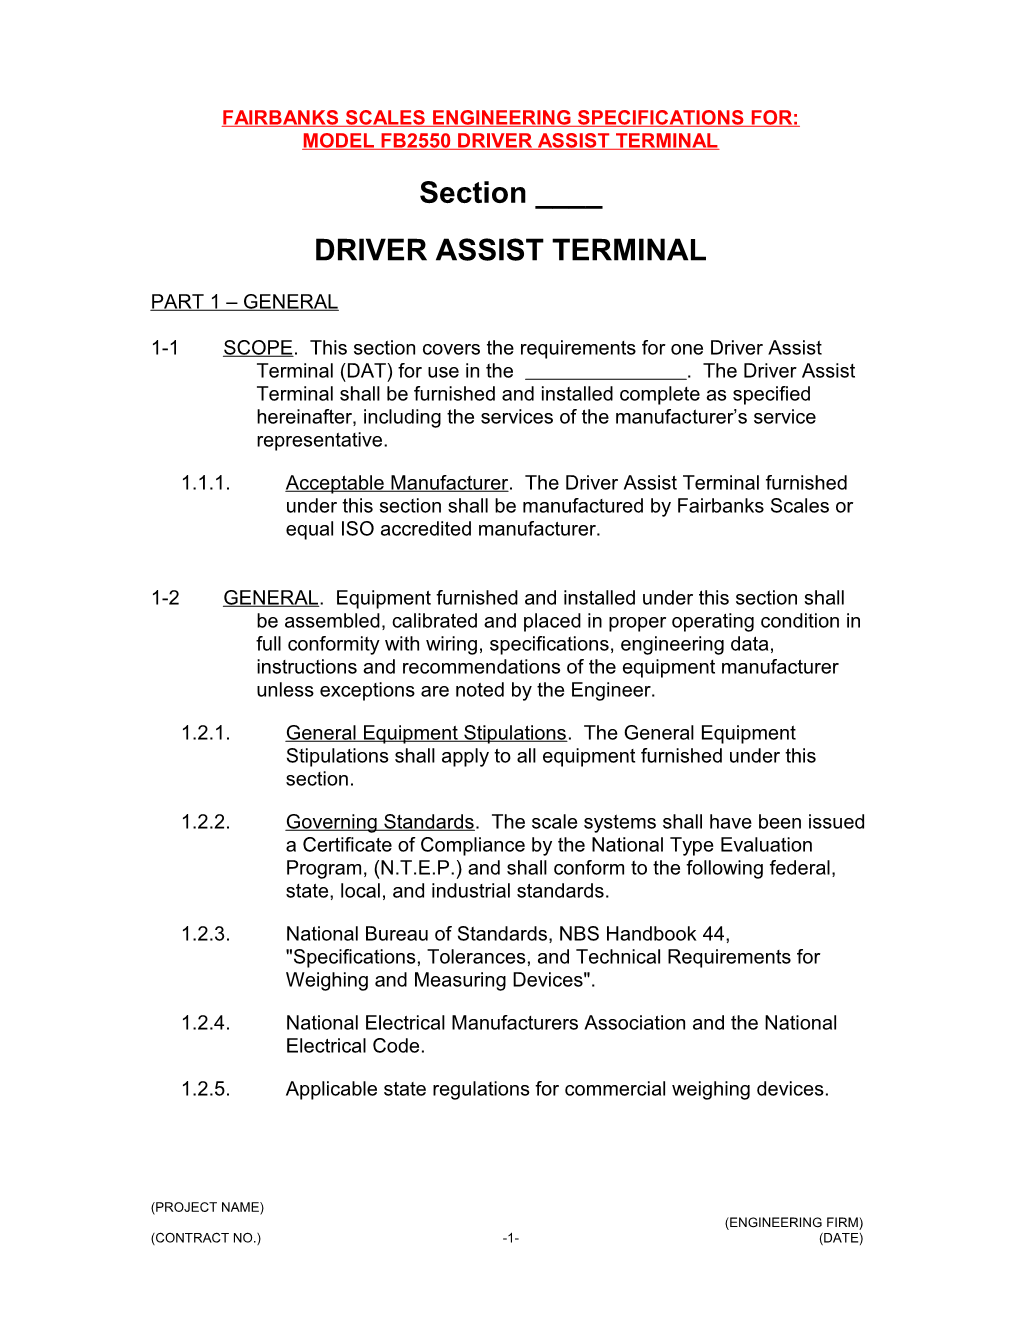 FB2550 Driver Assist Terminal Engineering Specifications